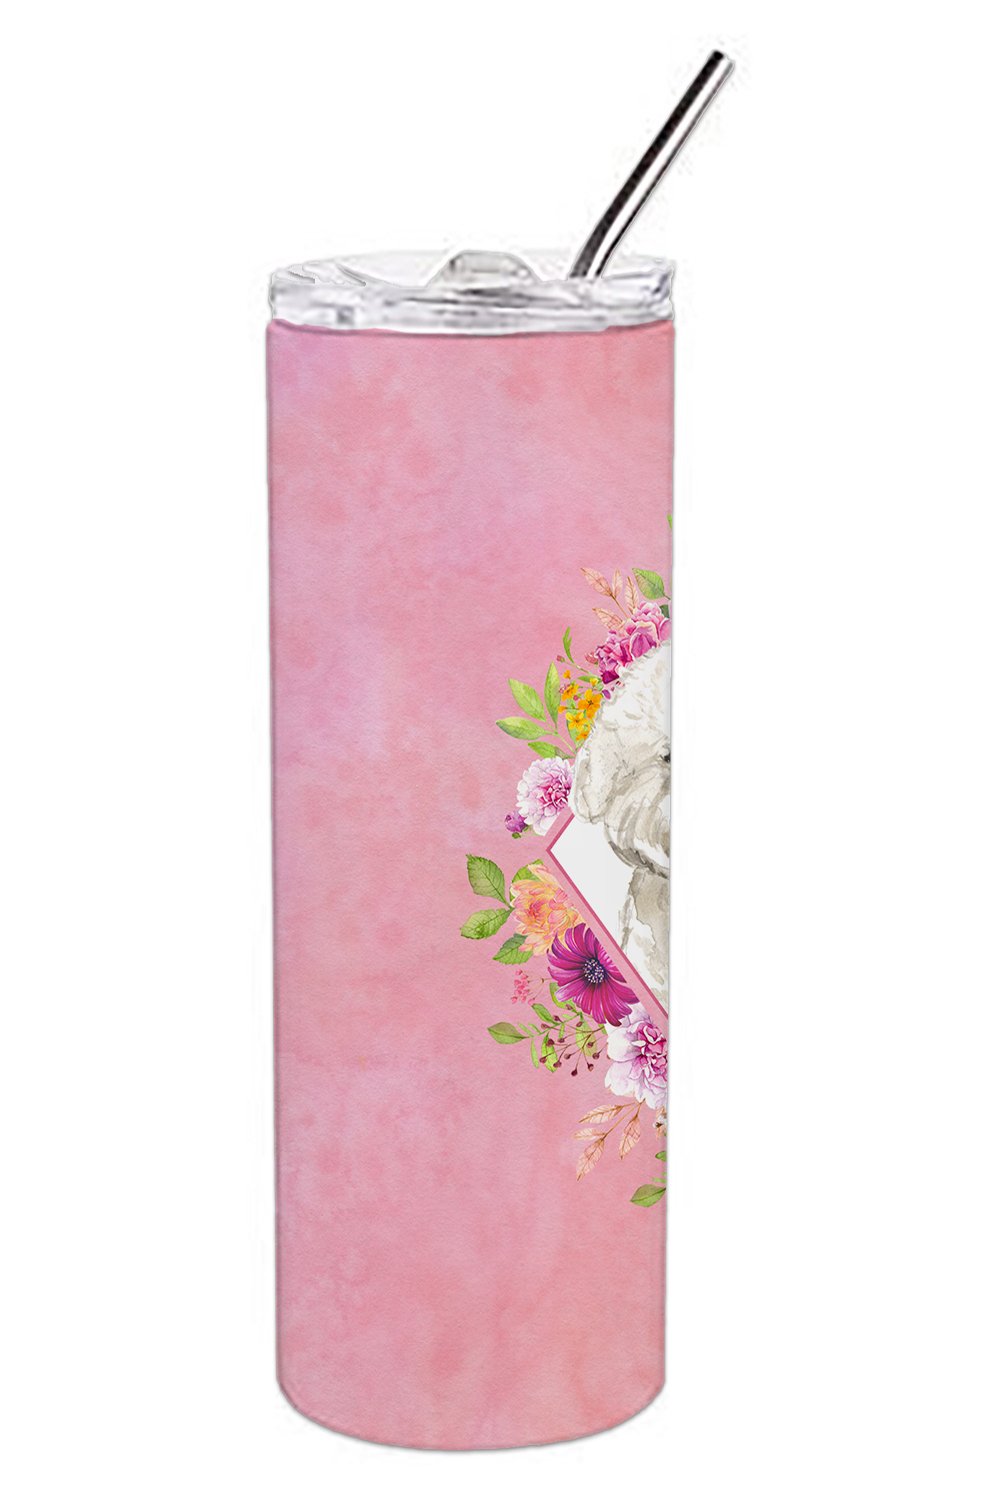 Bichon Frise Pink Flowers Double Walled Stainless Steel 20 oz Skinny Tumbler CK4263TBL20 by Caroline's Treasures